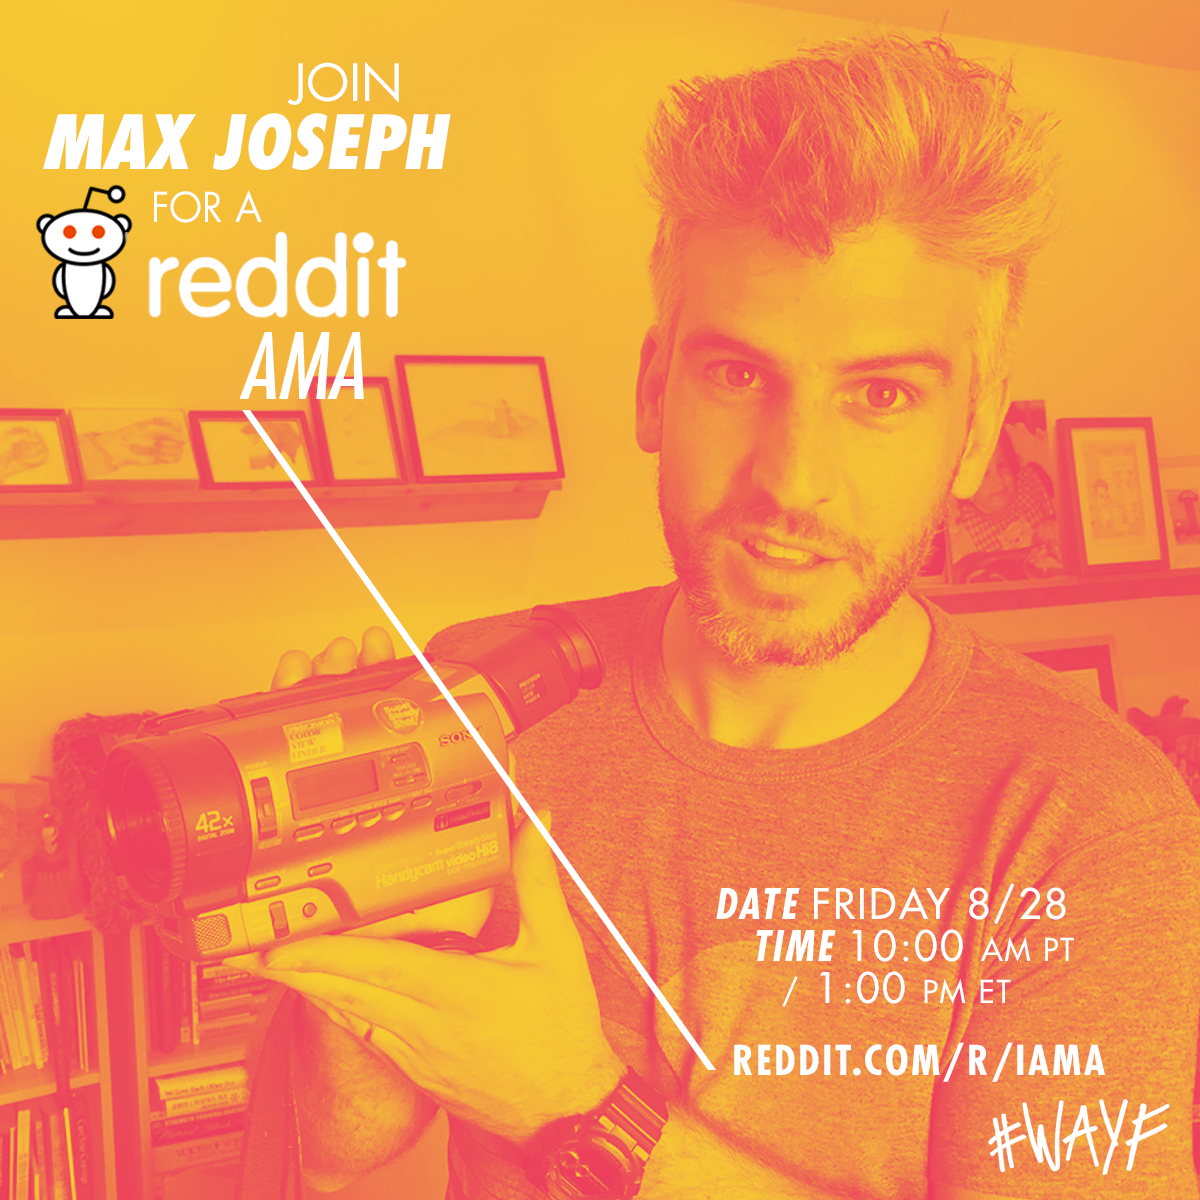 Join #WAYF director Max Joseph for a reddit AMA tomorrow (Friday, 8/28) at 10am PT / 1pm ET! http://reddit.com/r/iama 